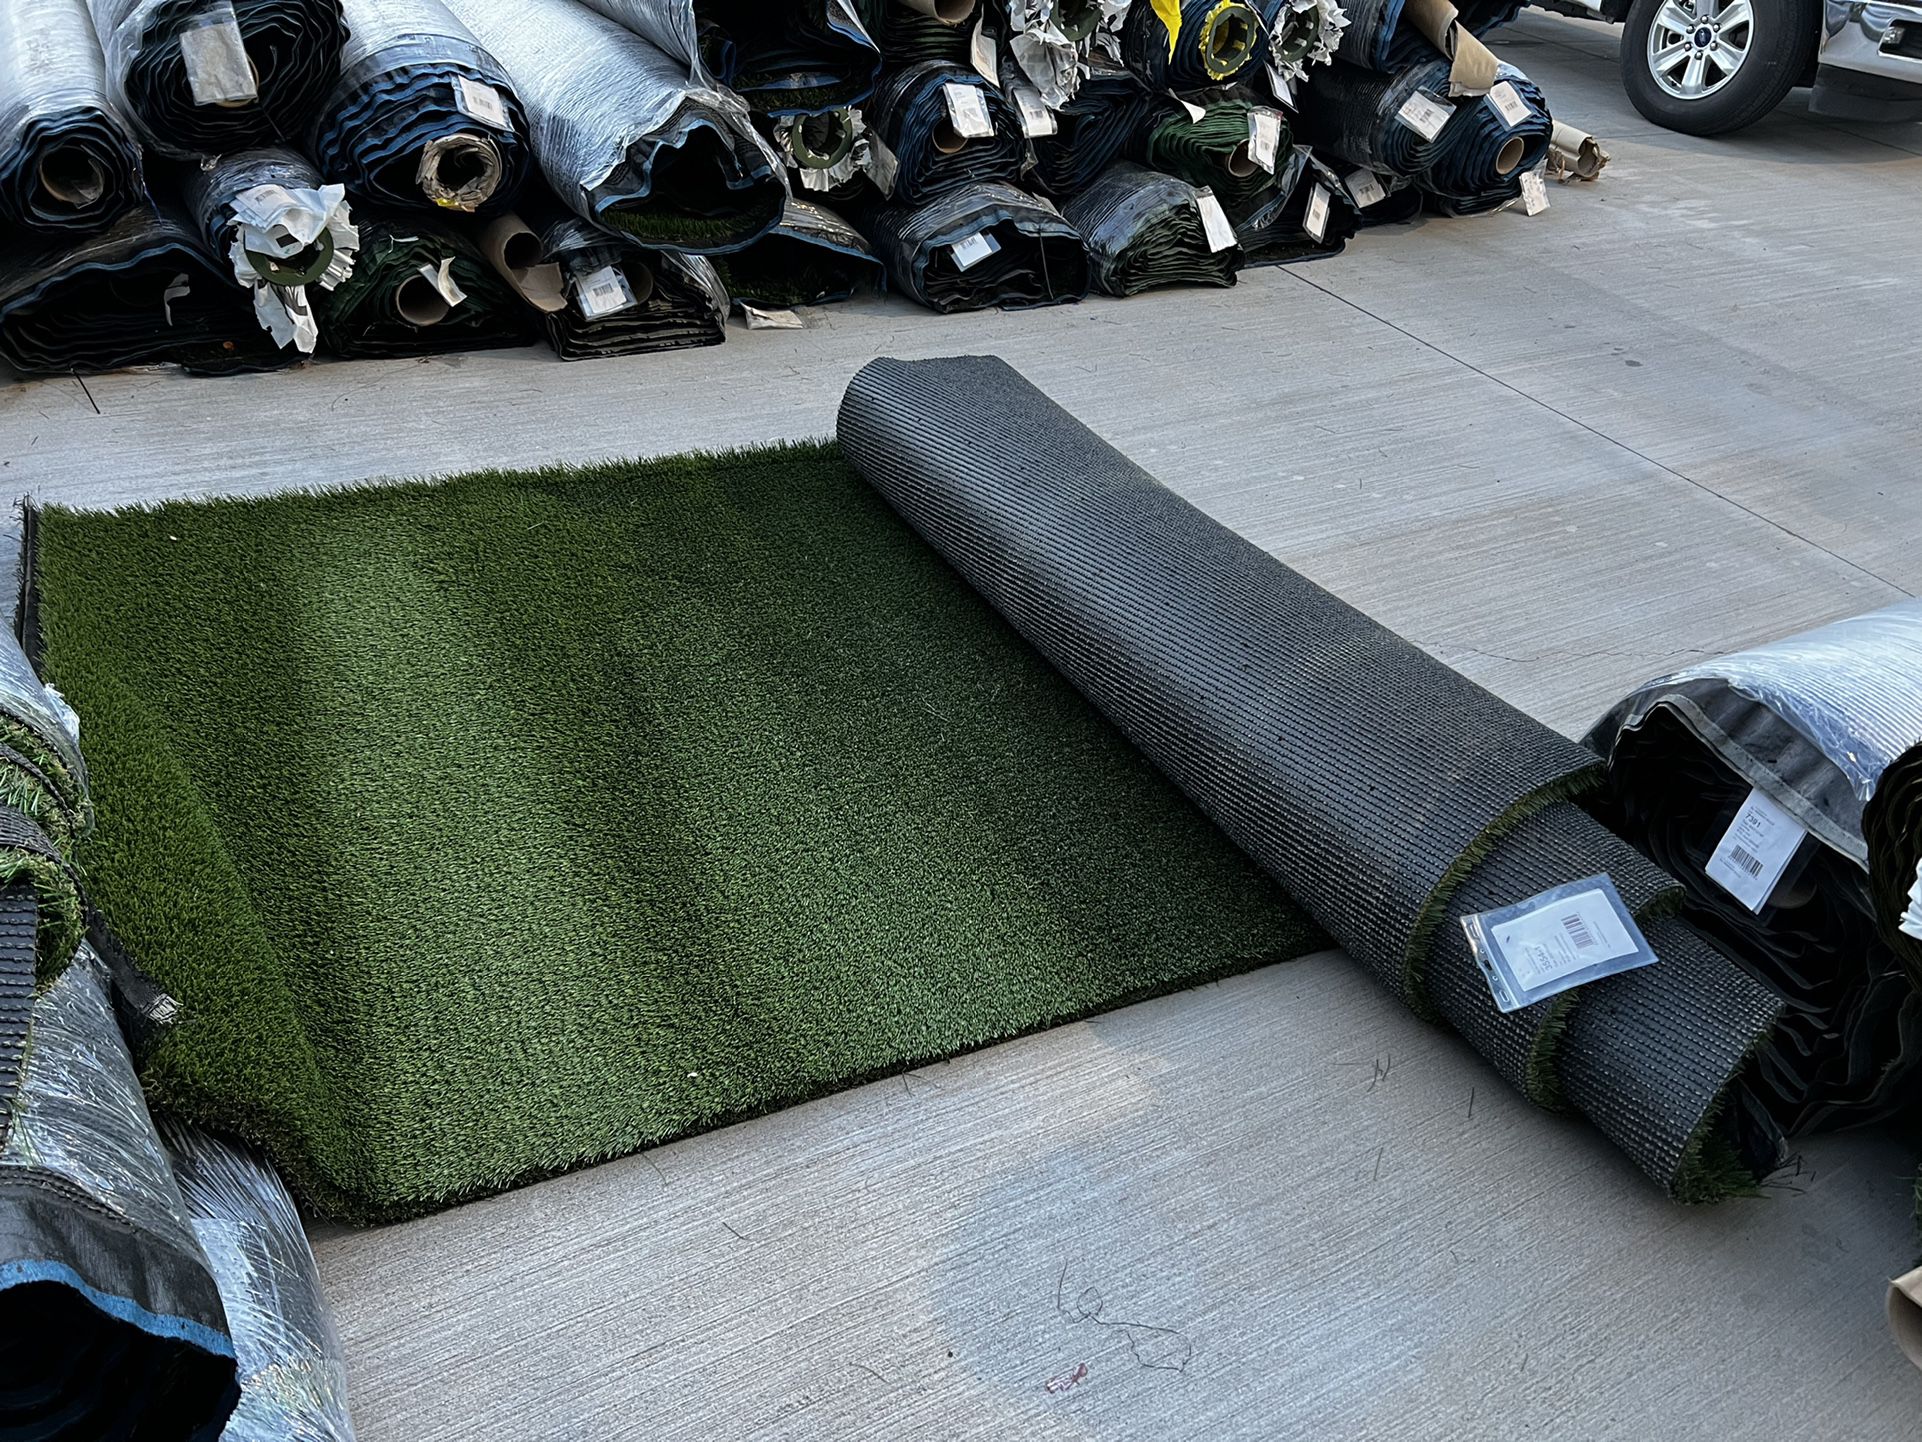 80oz 15x5 Remnant Turf Roll For Sale $1.40/sqft